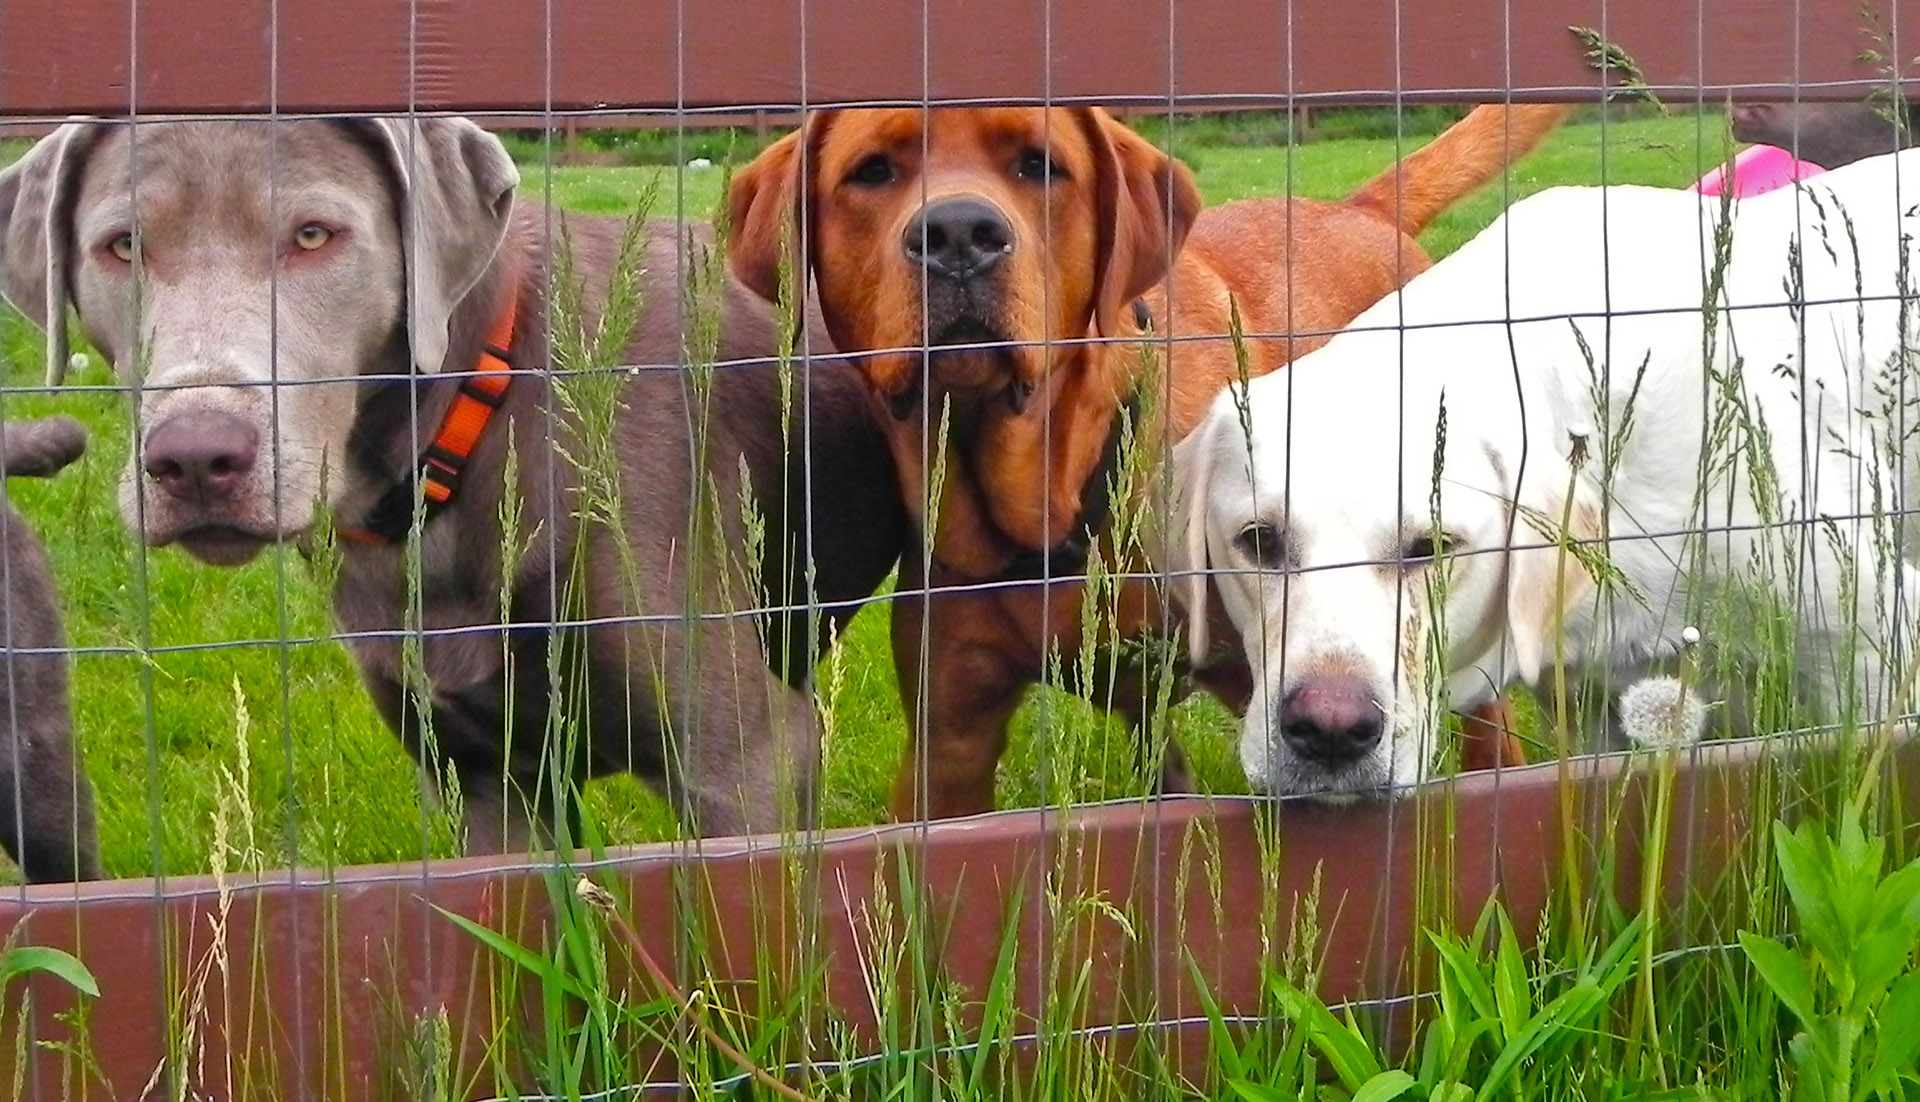 Three dogs peering through wire fence.